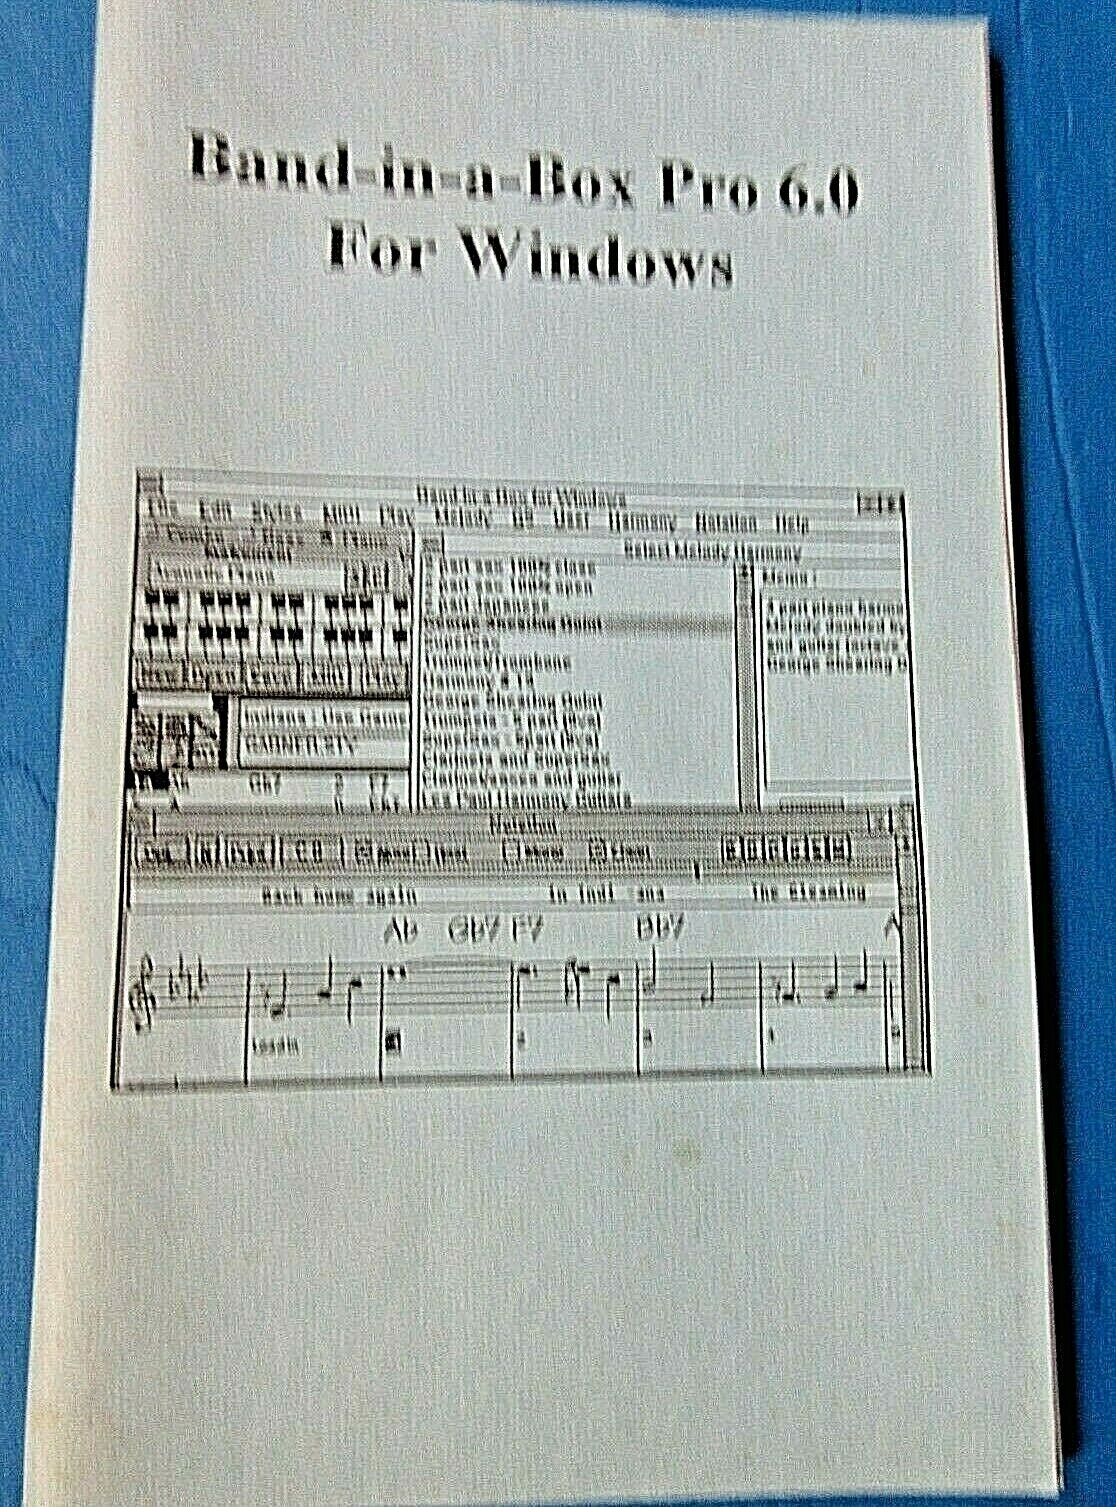 Vintage Band-in-a-Box Pro Version 6.0 Windows Manual 